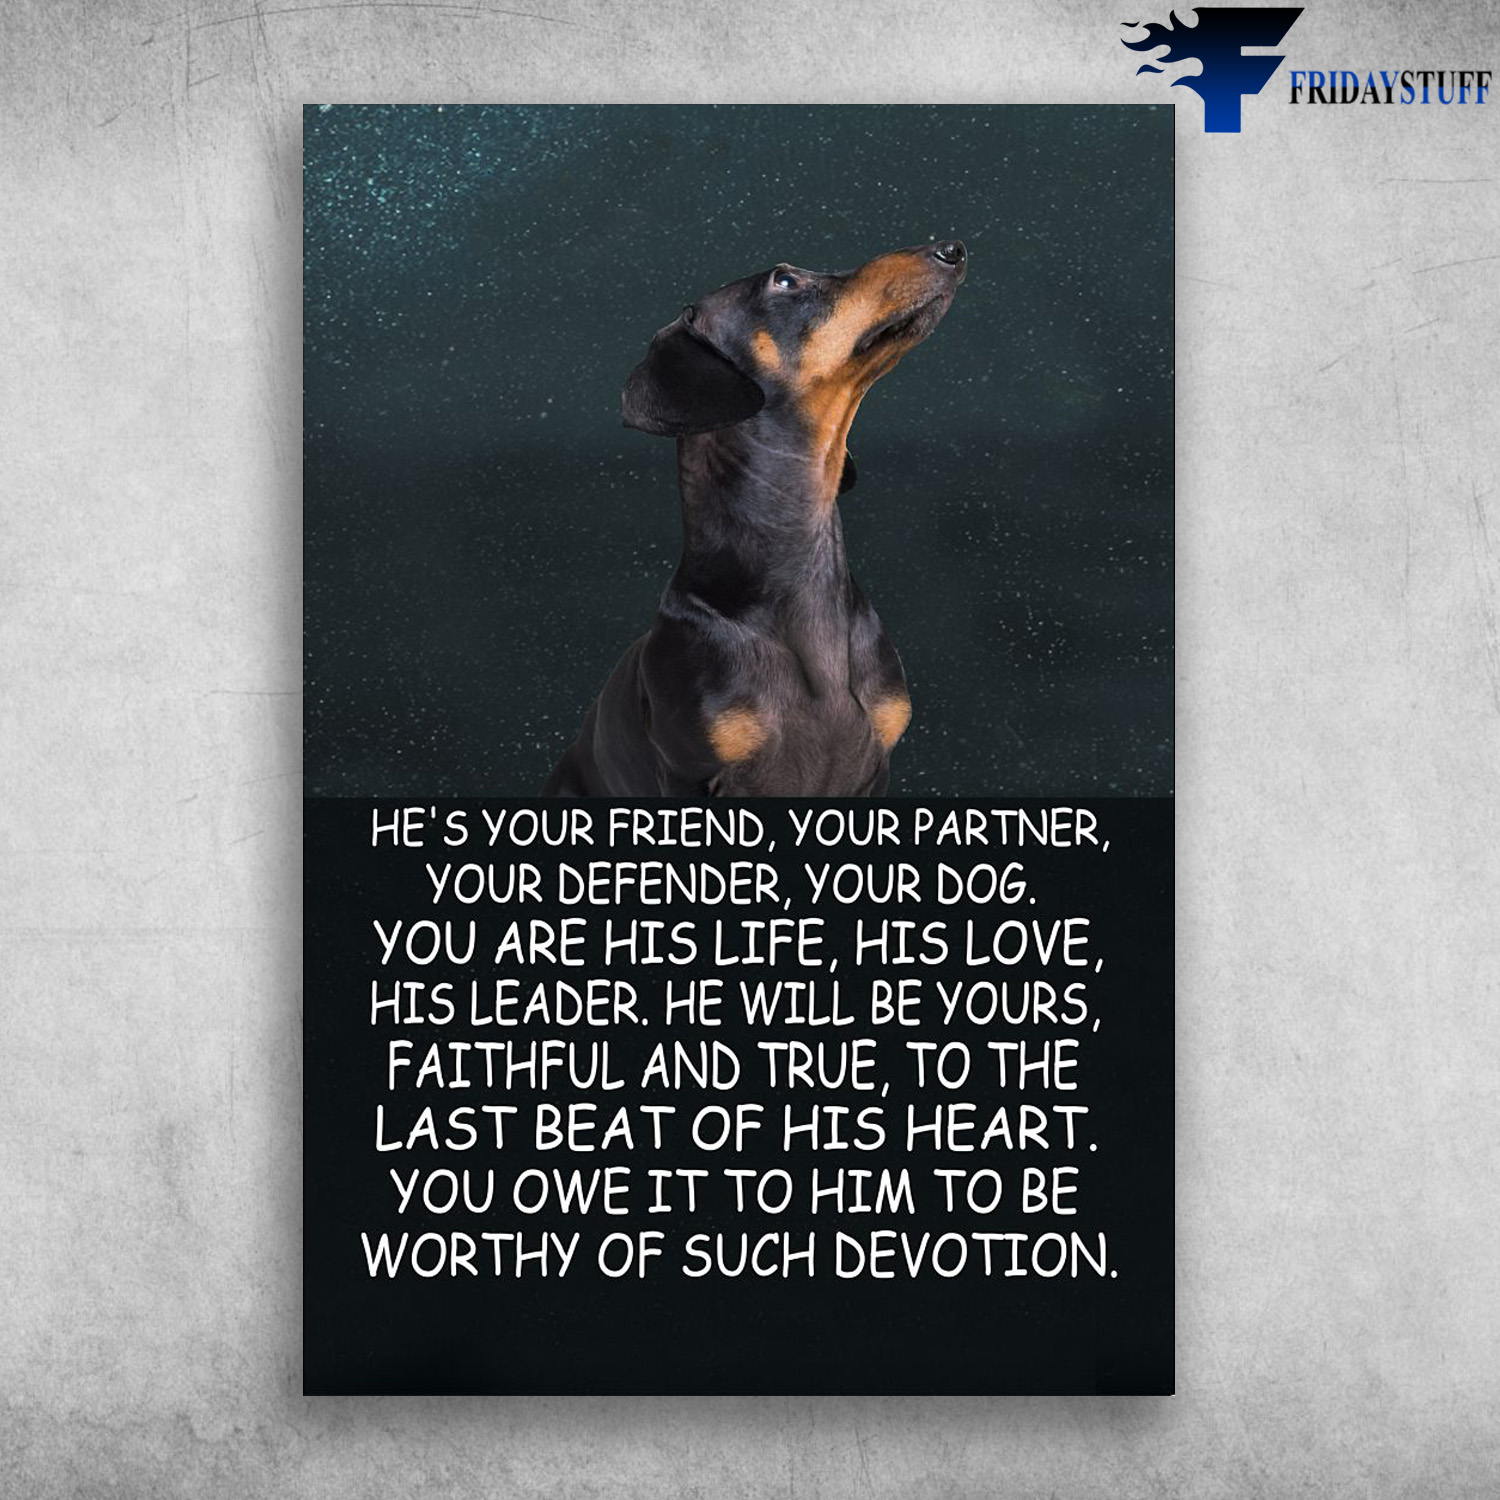 Dachshund Dog - He's Your Friend, Your Partner, Your Defender, Your Dog, You Are His Life, His Love, His Leader, He Will Be Yours, Faithful And True, To The Last Of His Heart, You Owe It To Him, To Be Worthy Of Such Devotion